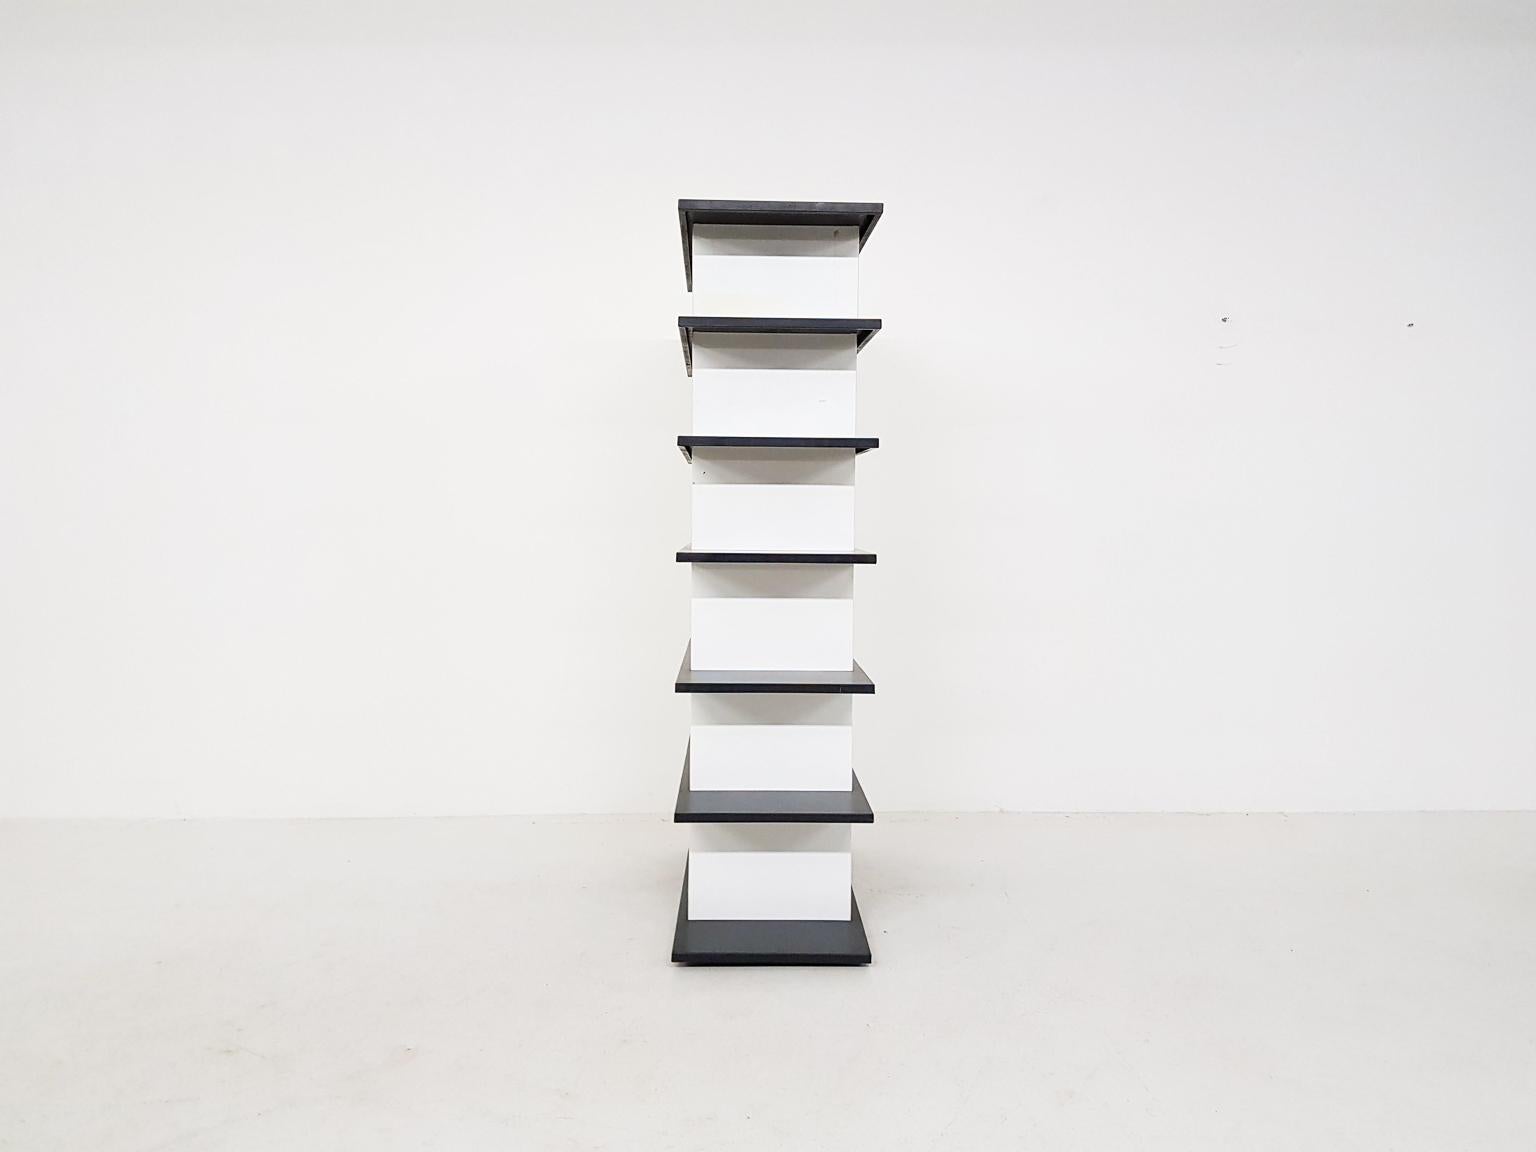 Mid-Century Modern Gerrit Rietveld inspired Room Divider or Bookcase by Wim Rietveld, Dutch, 1960s For Sale